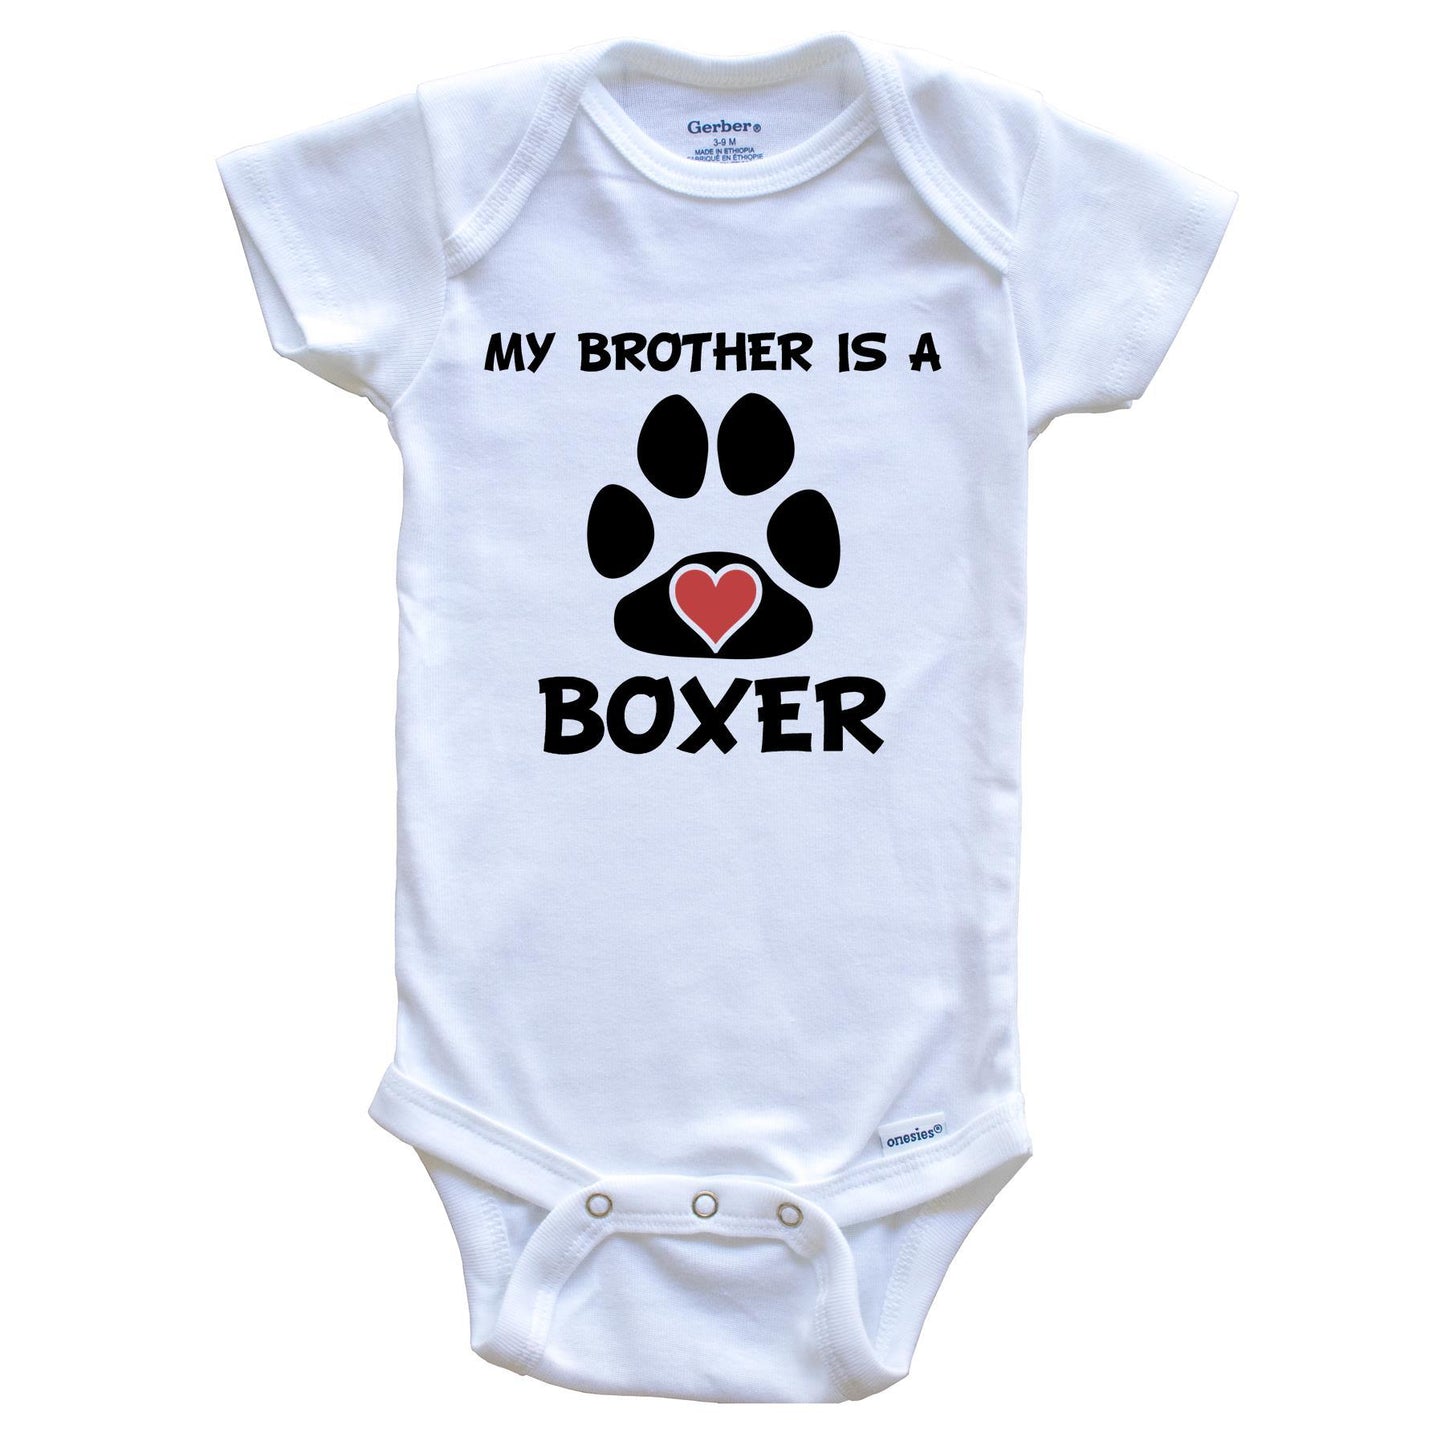 My Brother Is A Boxer Baby Onesie